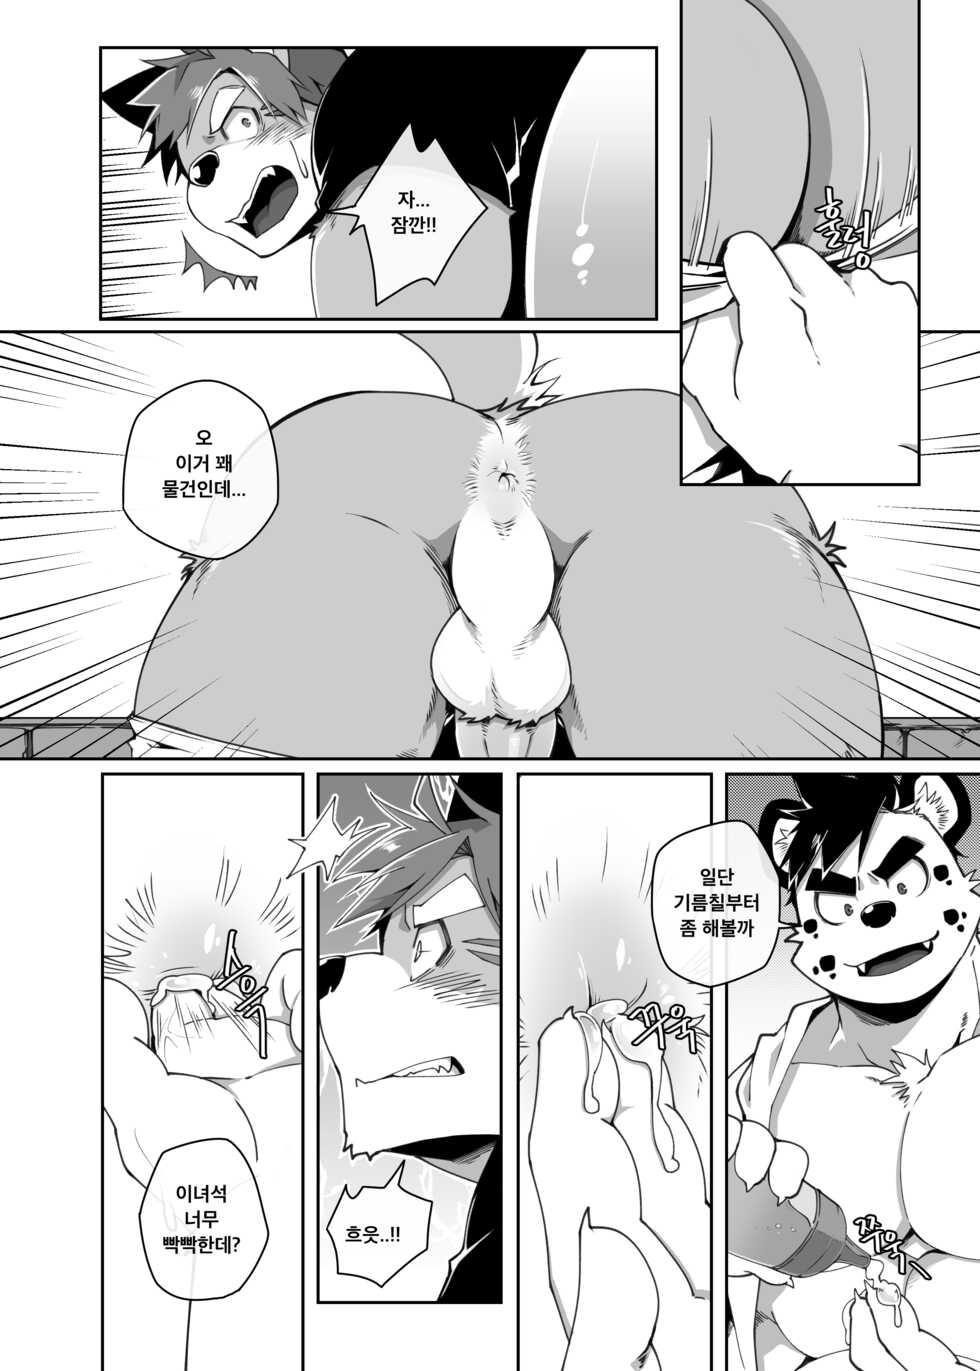 [MIKKY] Hero's Deepest Secret Ep.2 [Korean] [Uncensored] - Page 10